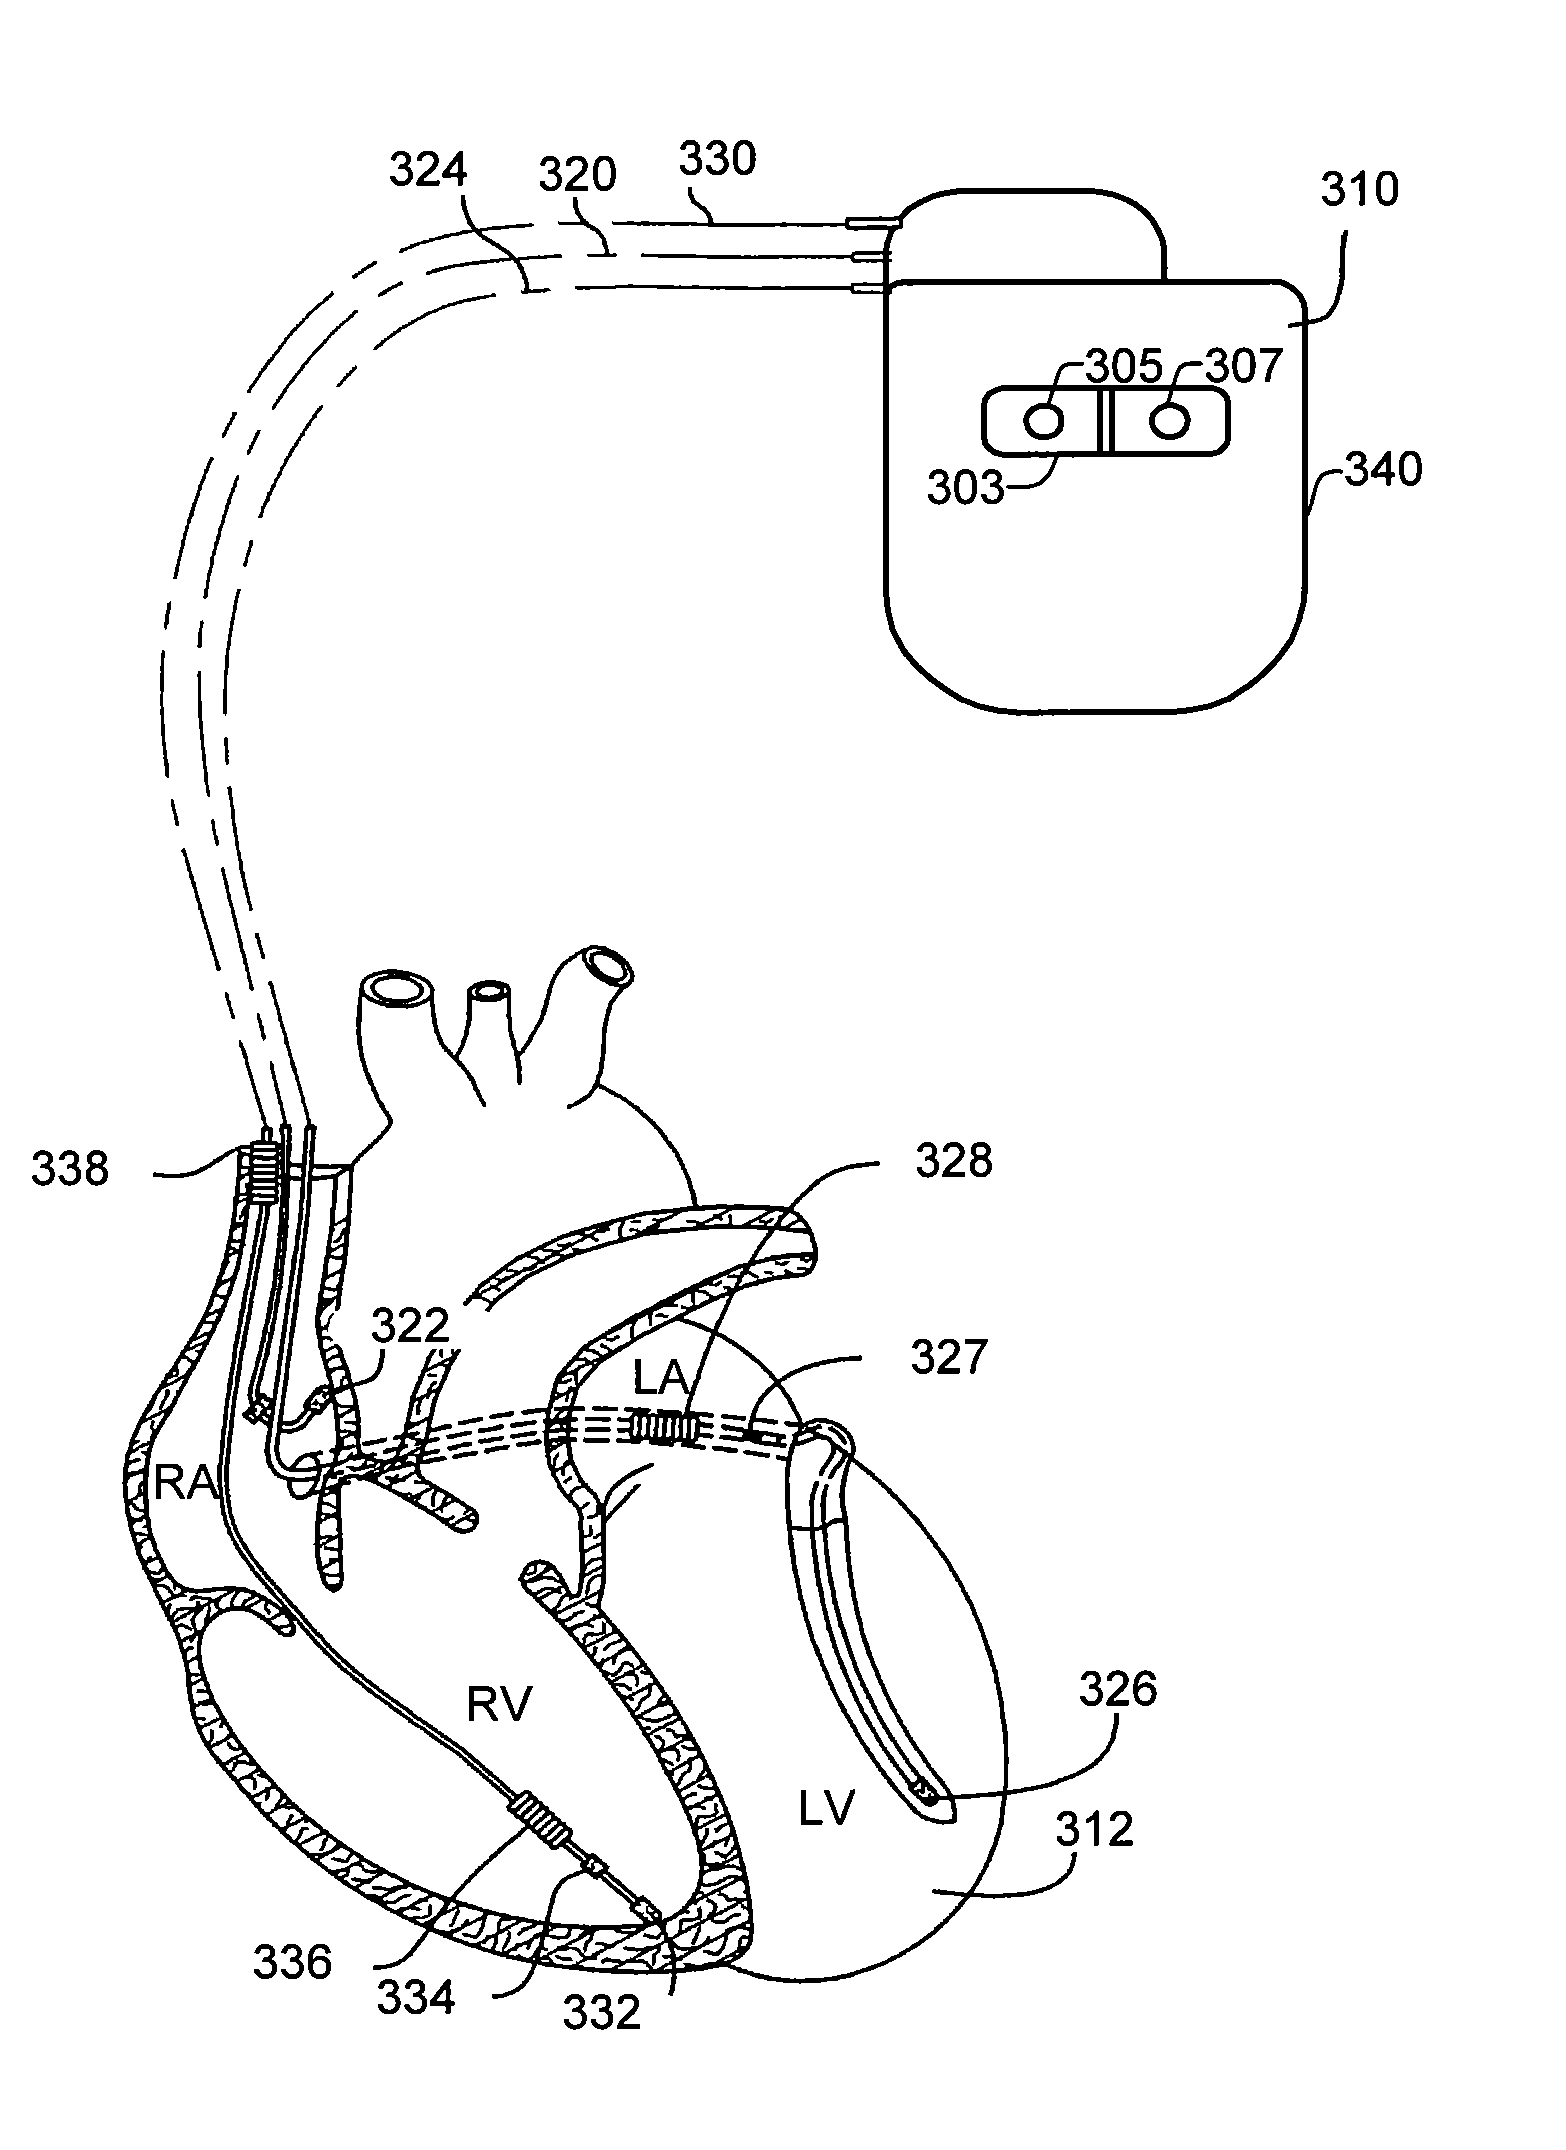 Implantable Systemic Blood Pressure Measurement Systems and Methods